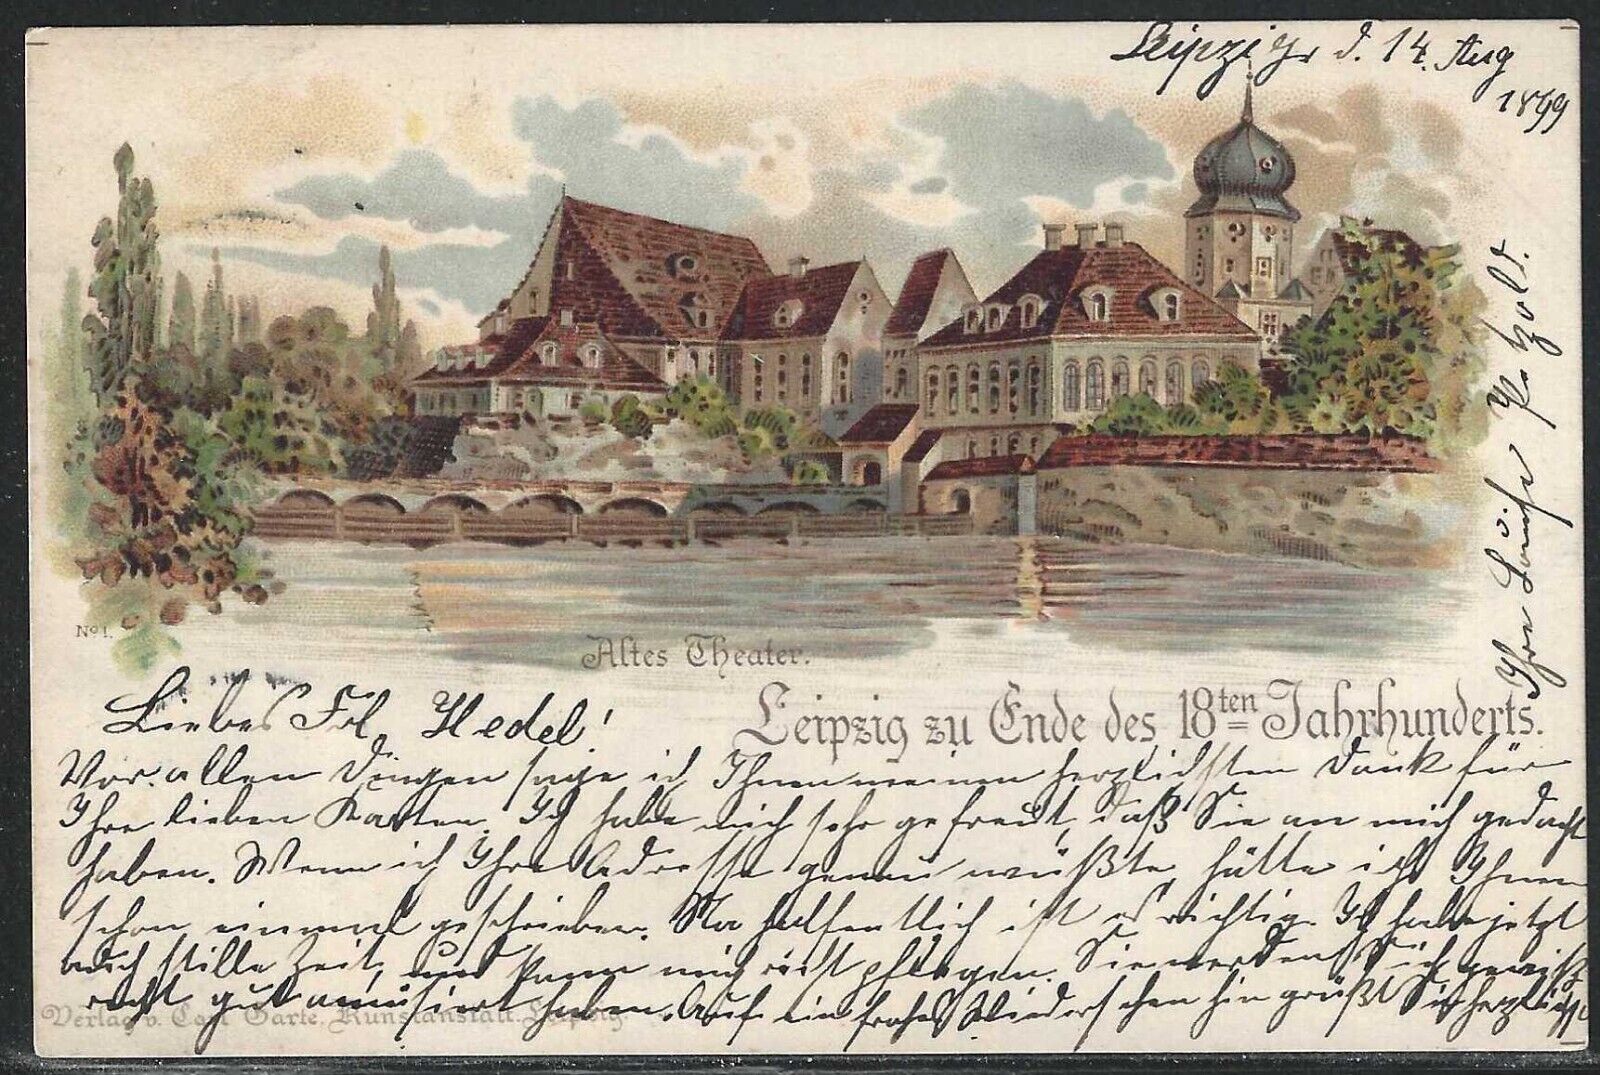 View of the Altes Theater, Leipzig, Germany, Postcard, Used in 1899